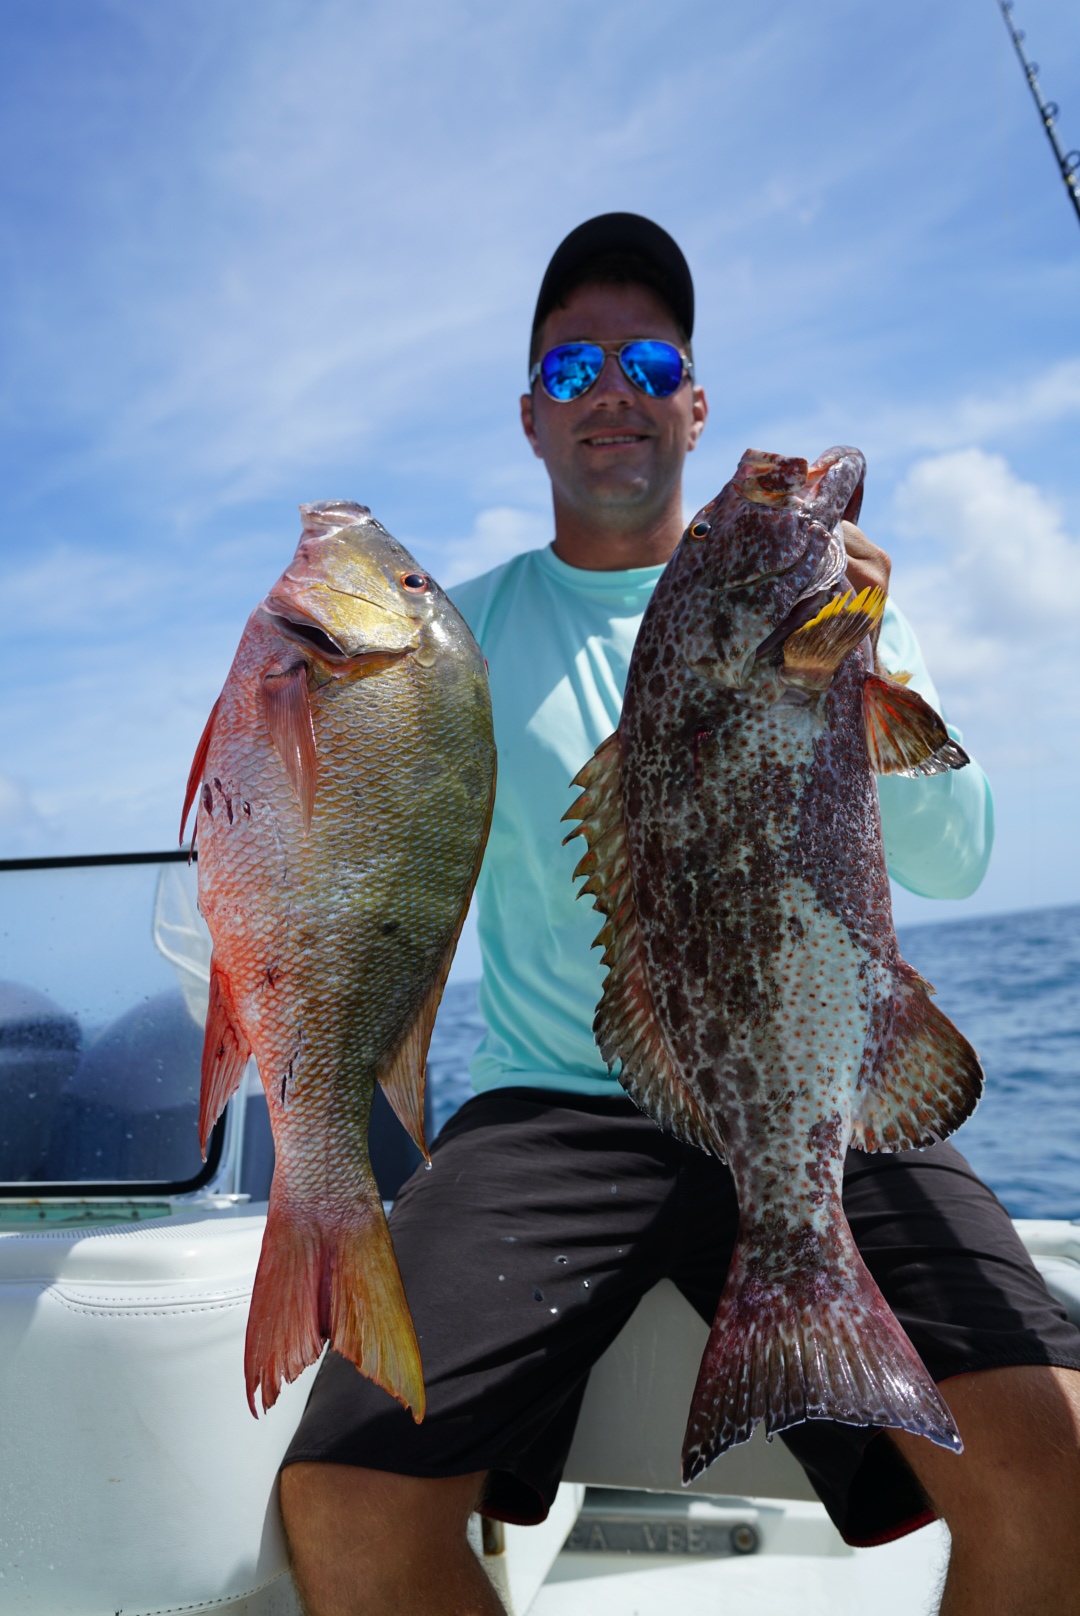 The Prize of Bottom Fishing.Snapper and Grouper - Saltwater Angler